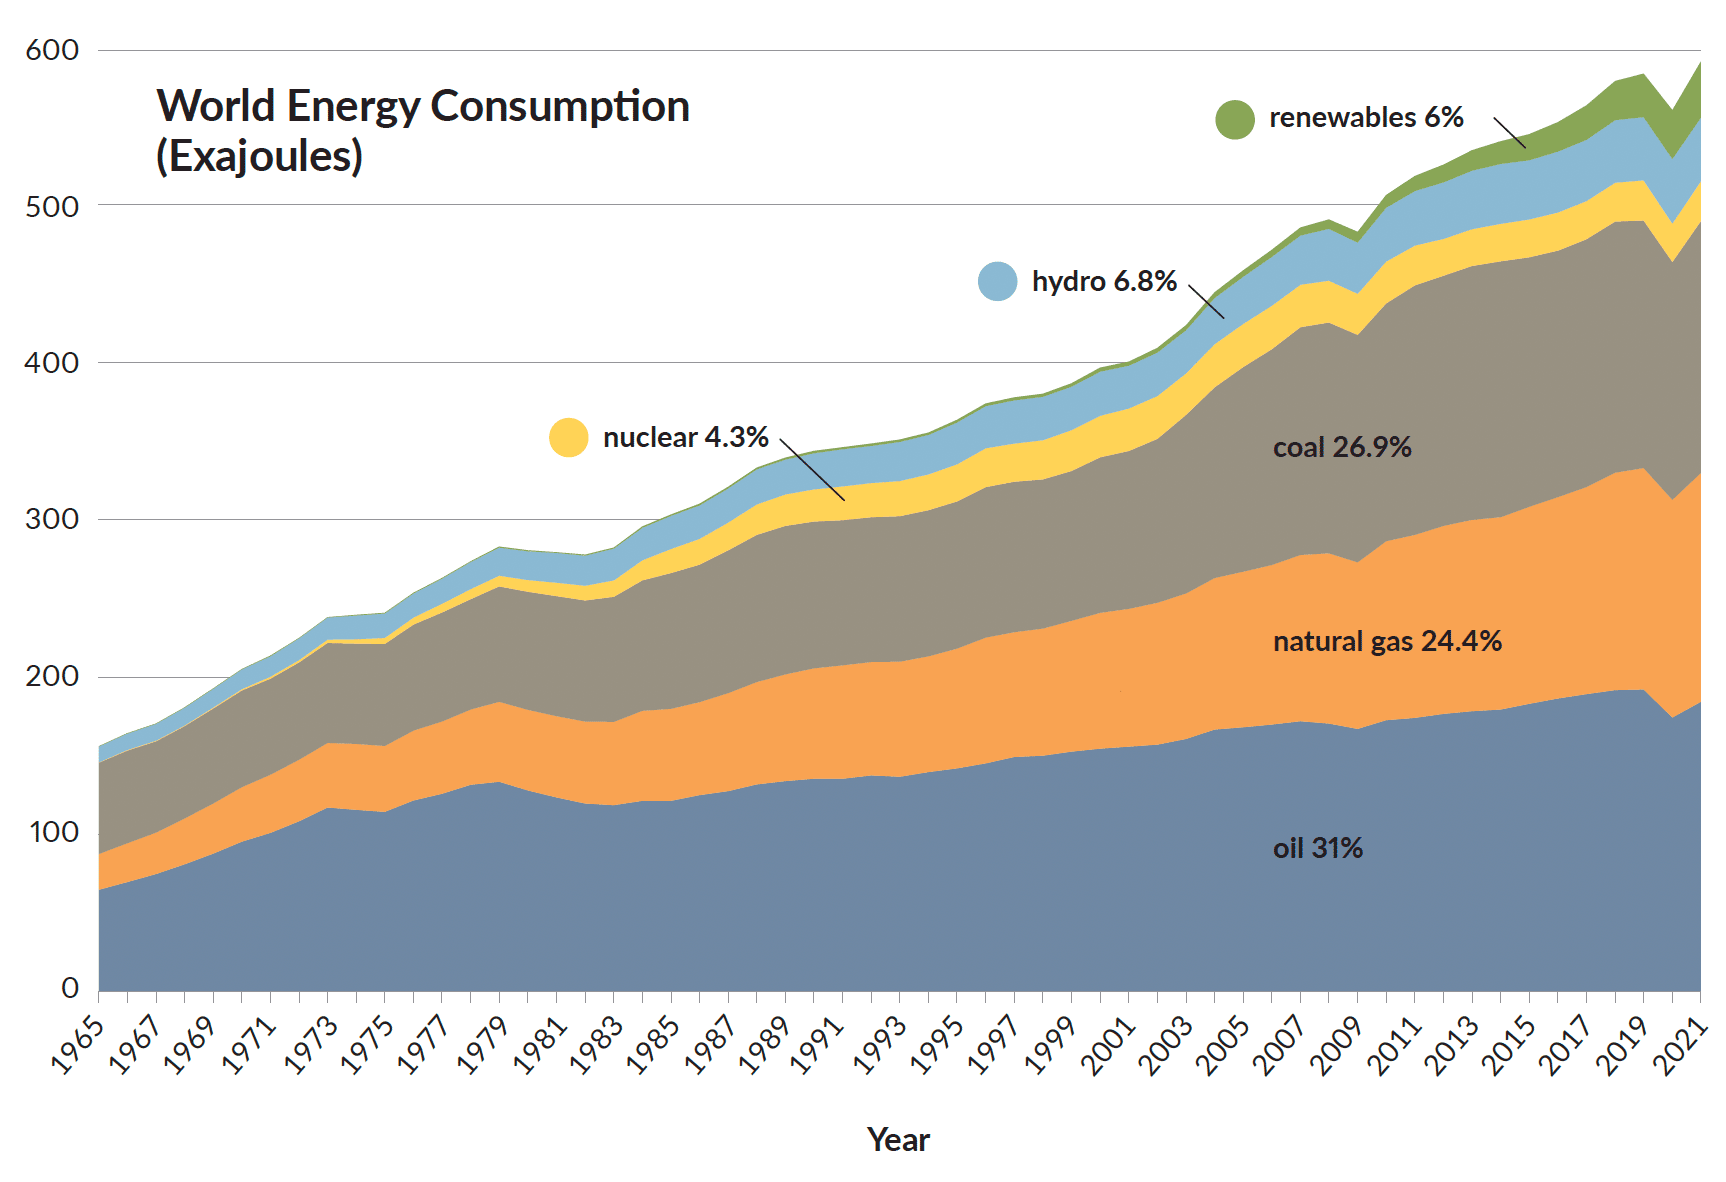 World energy consumption in exajoules of various commodities